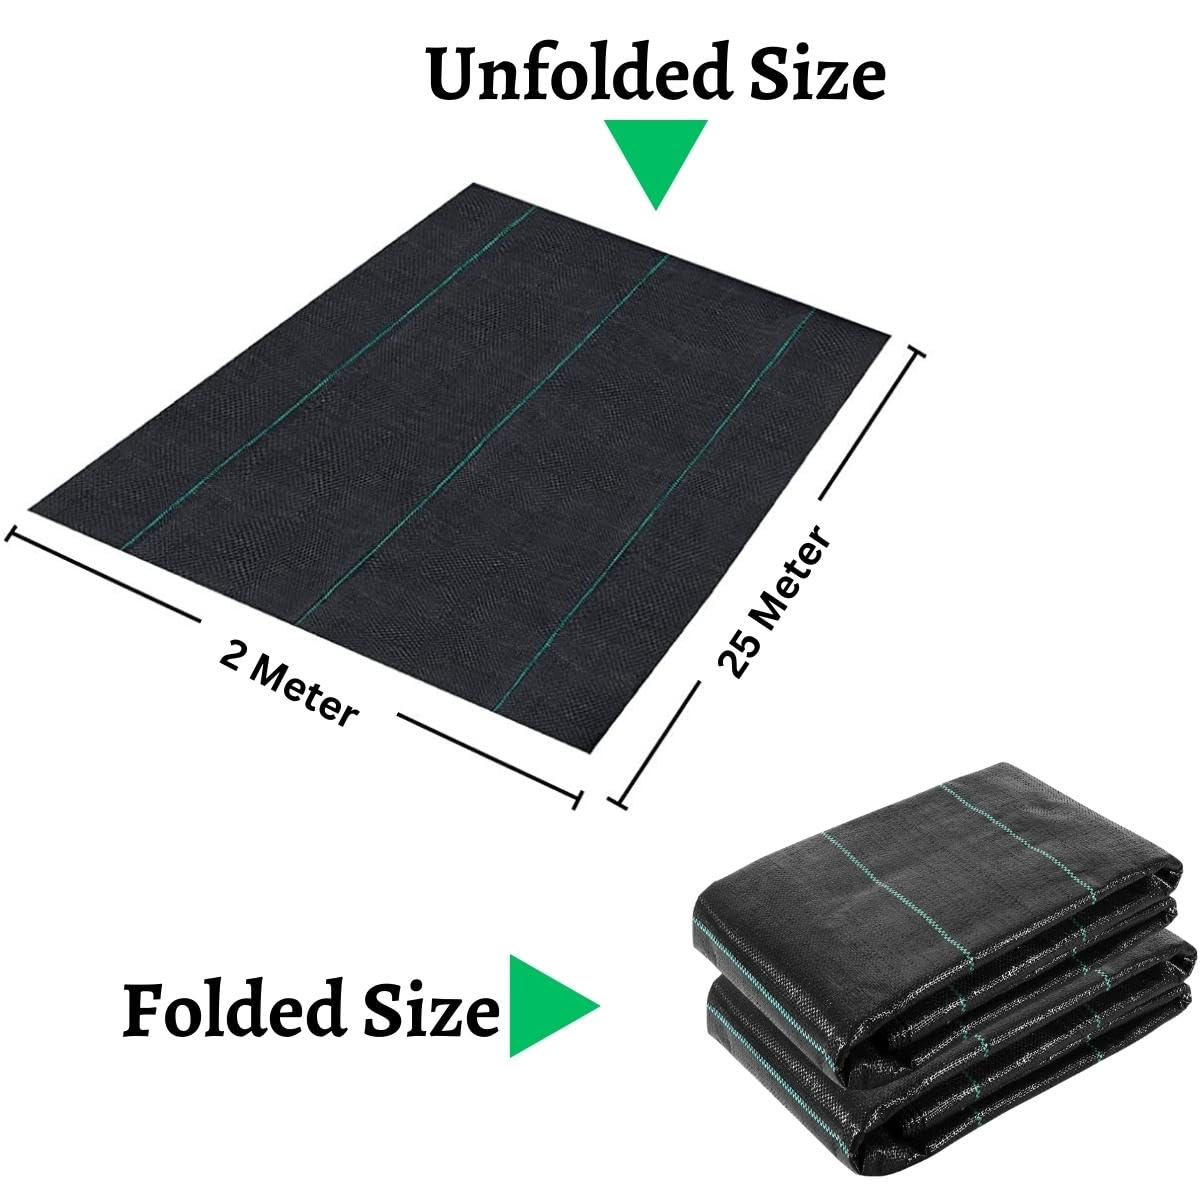 Singhal Premium Garden Weed Control Barrier Sheet Mat 2 Meter x 25 Meter, Landscape Fabric 110 GSM Heavy Duty Weed Block Gardening Mat for Gardens, Agriculture, Outdoor Projects (Black)